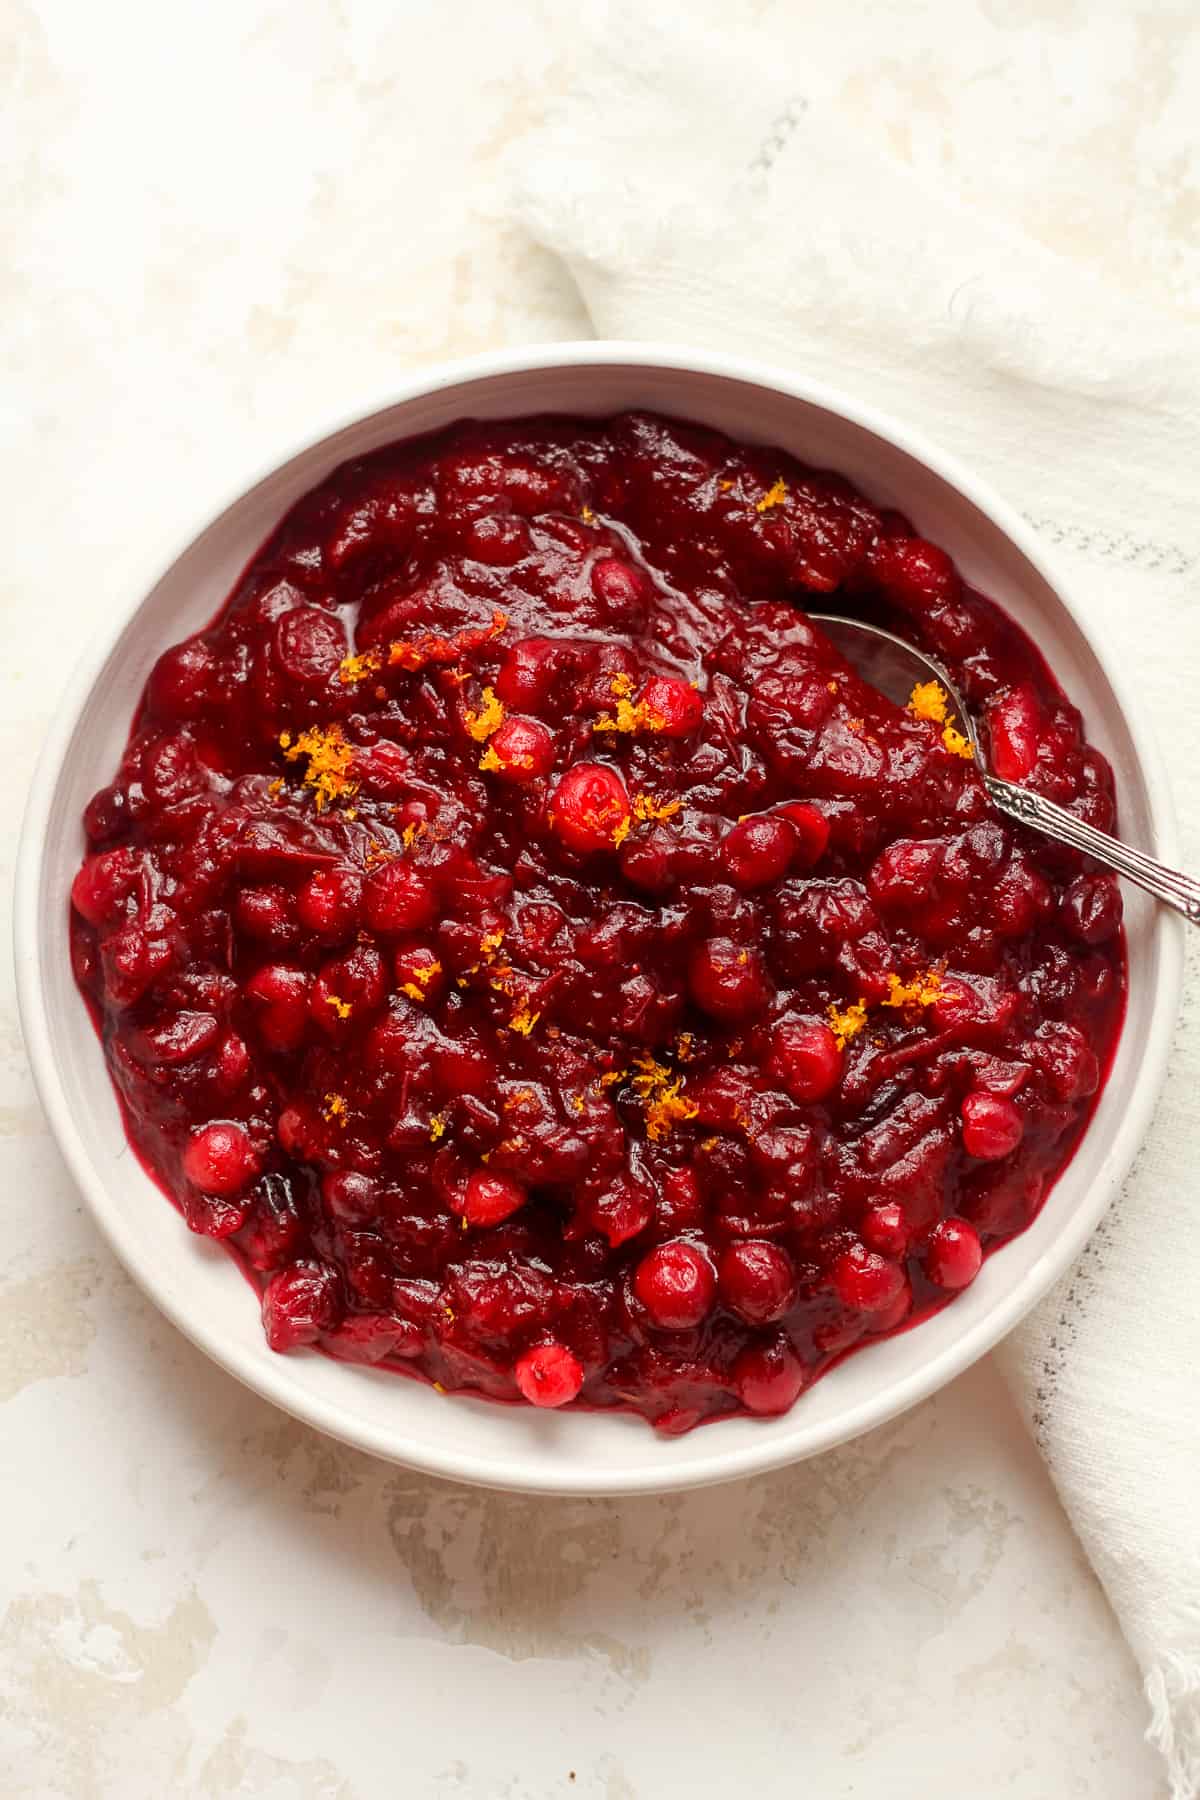 Overhead view of a bowl of cranberry sauce with orange zest.